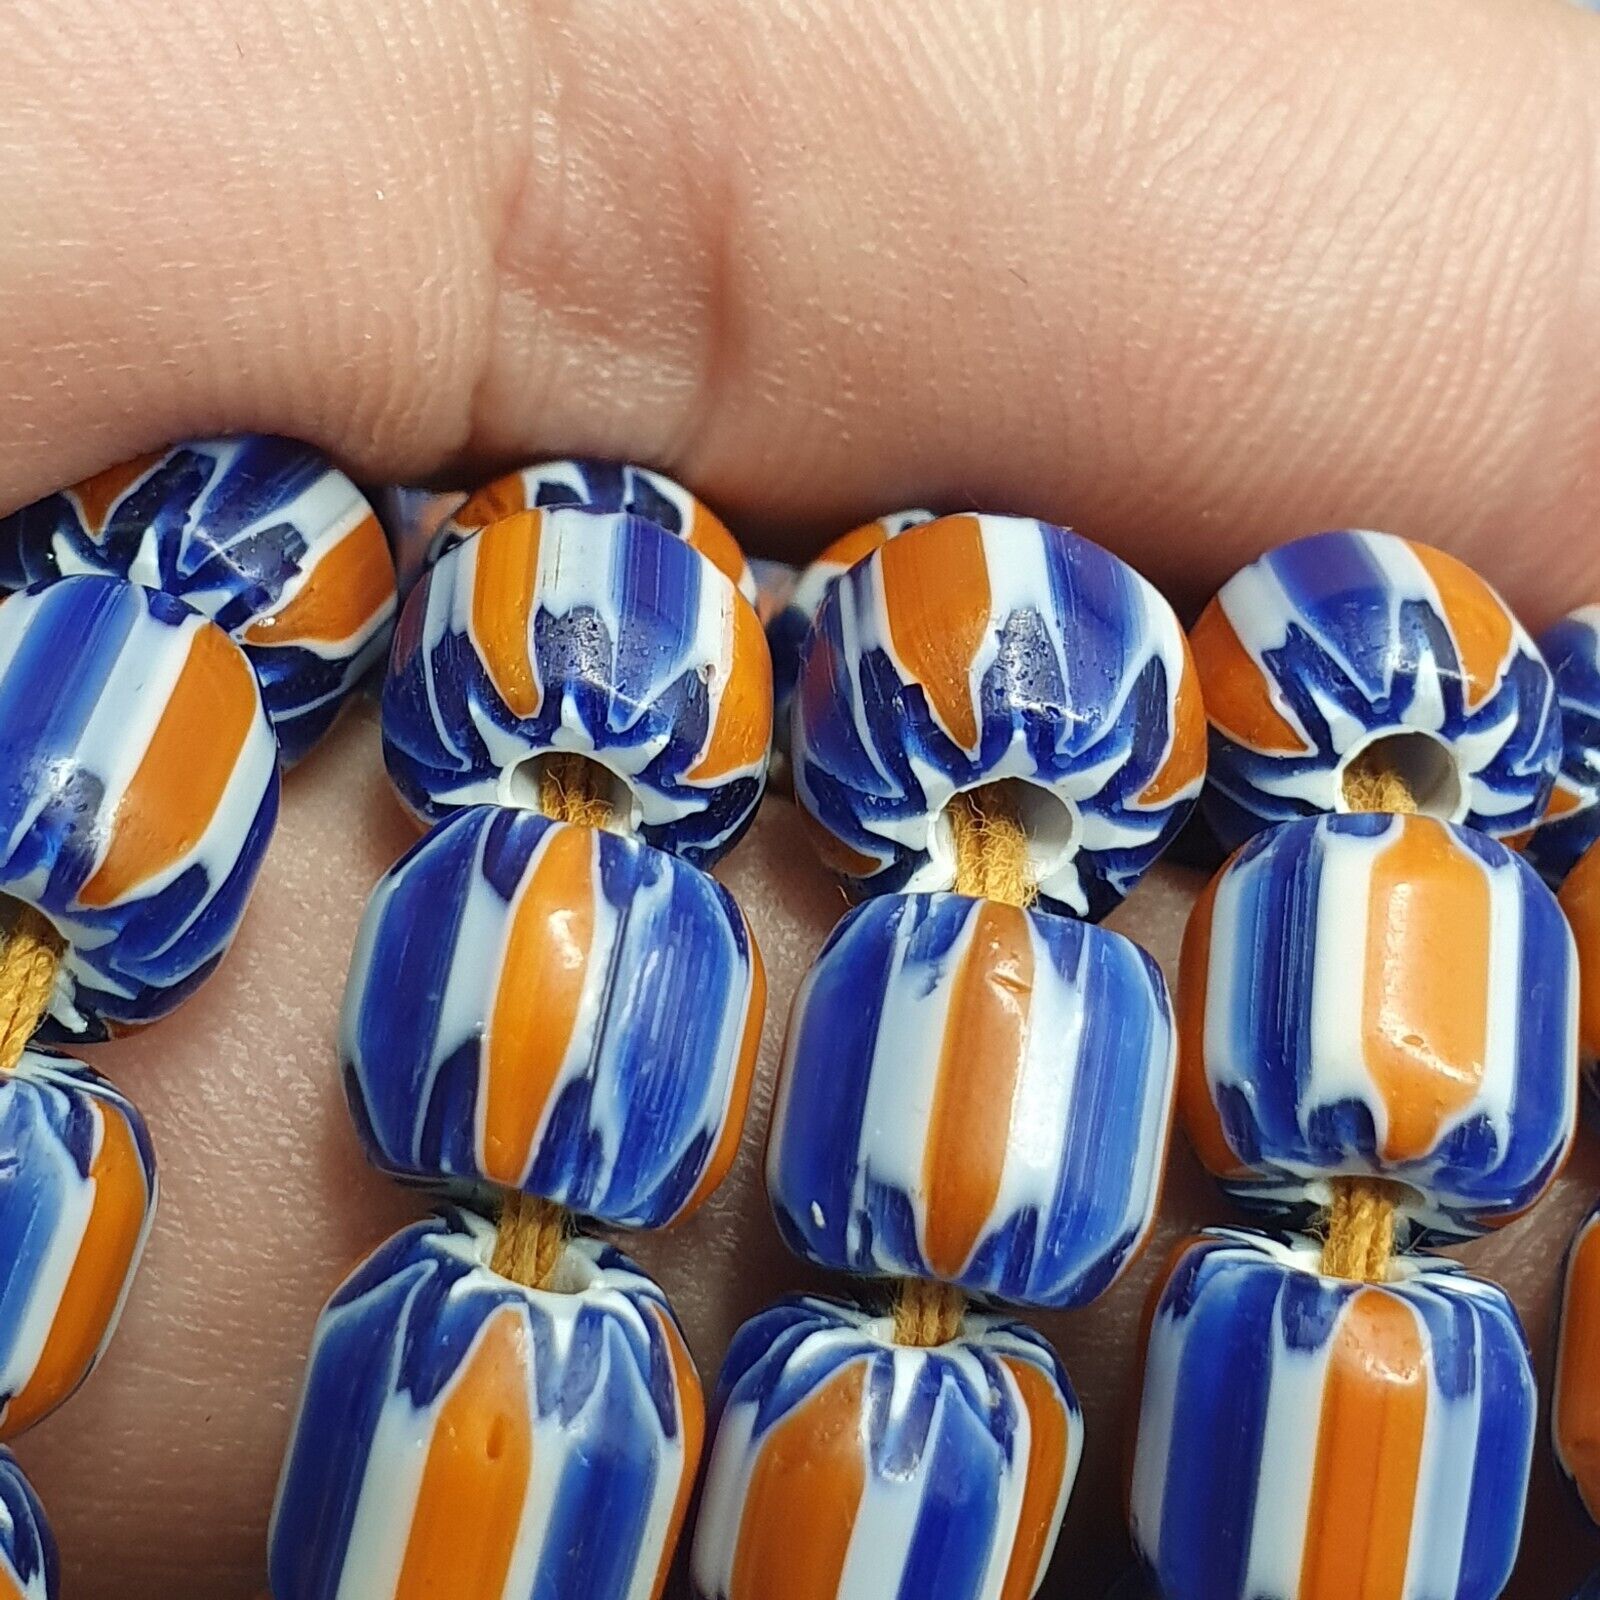 Vintage Venetian Style beads Old African Glass Chevron Beads Long Strand